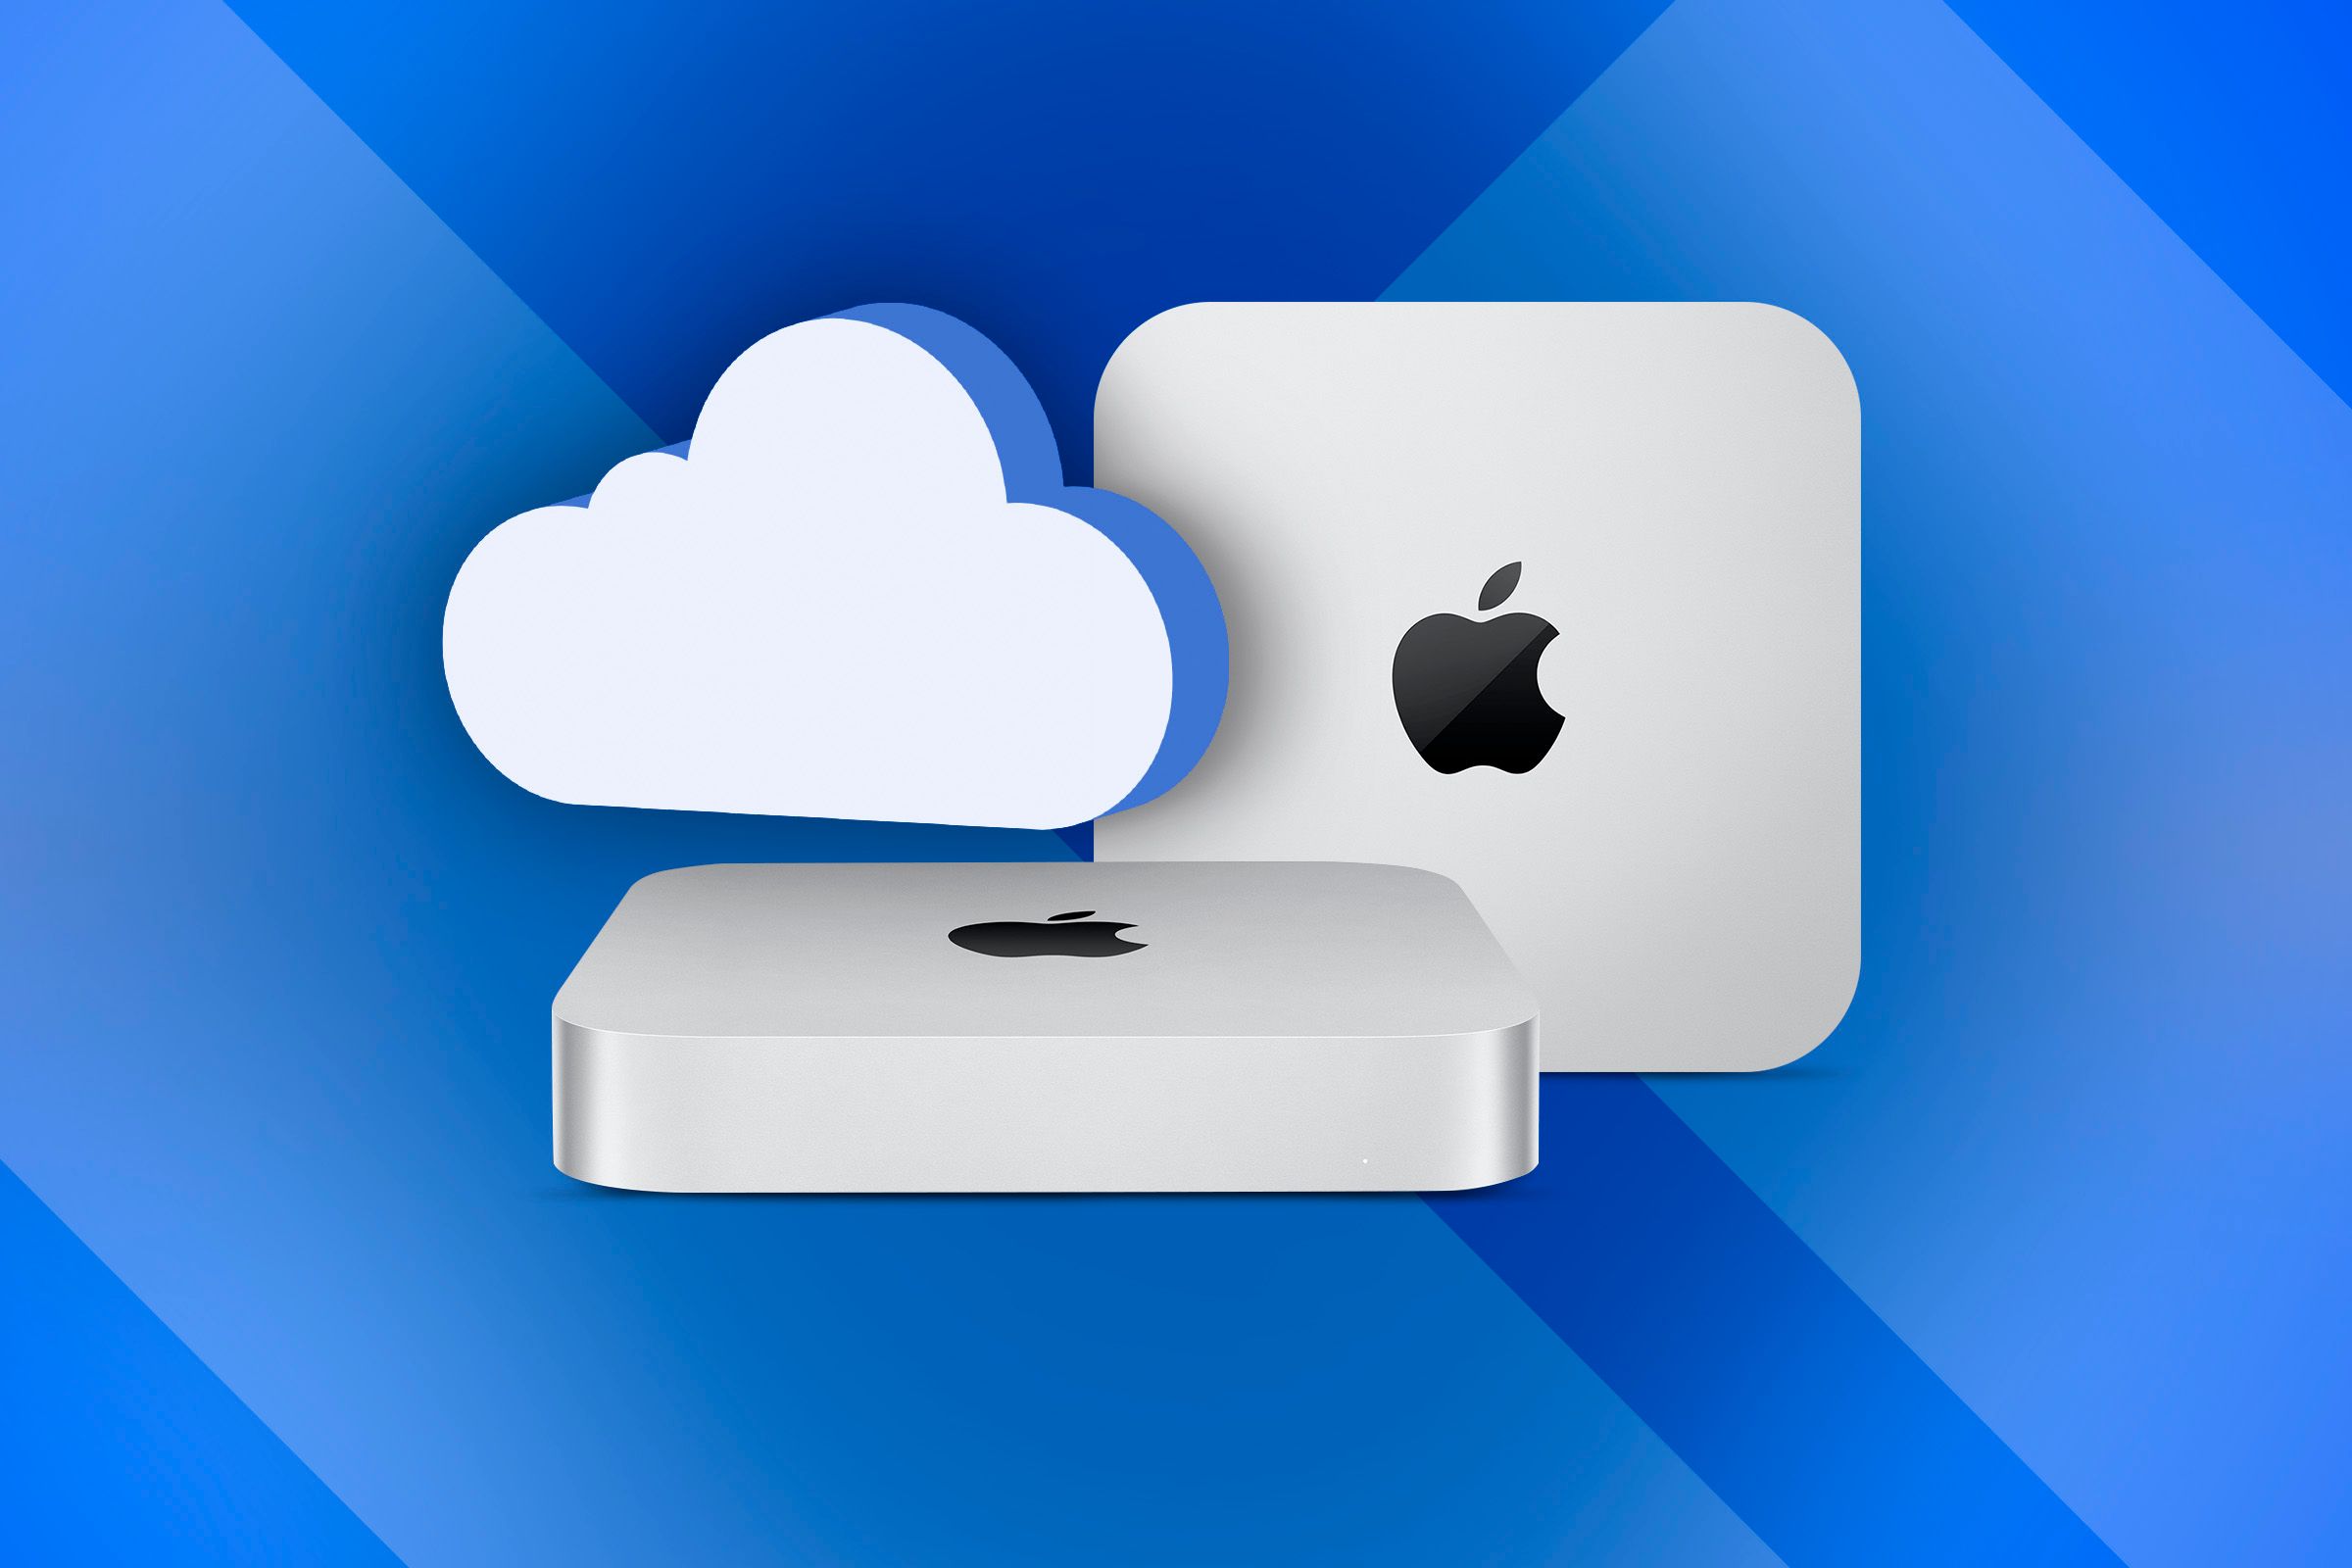 Two views of an Imac and a cloud icon representing the cloud rent.